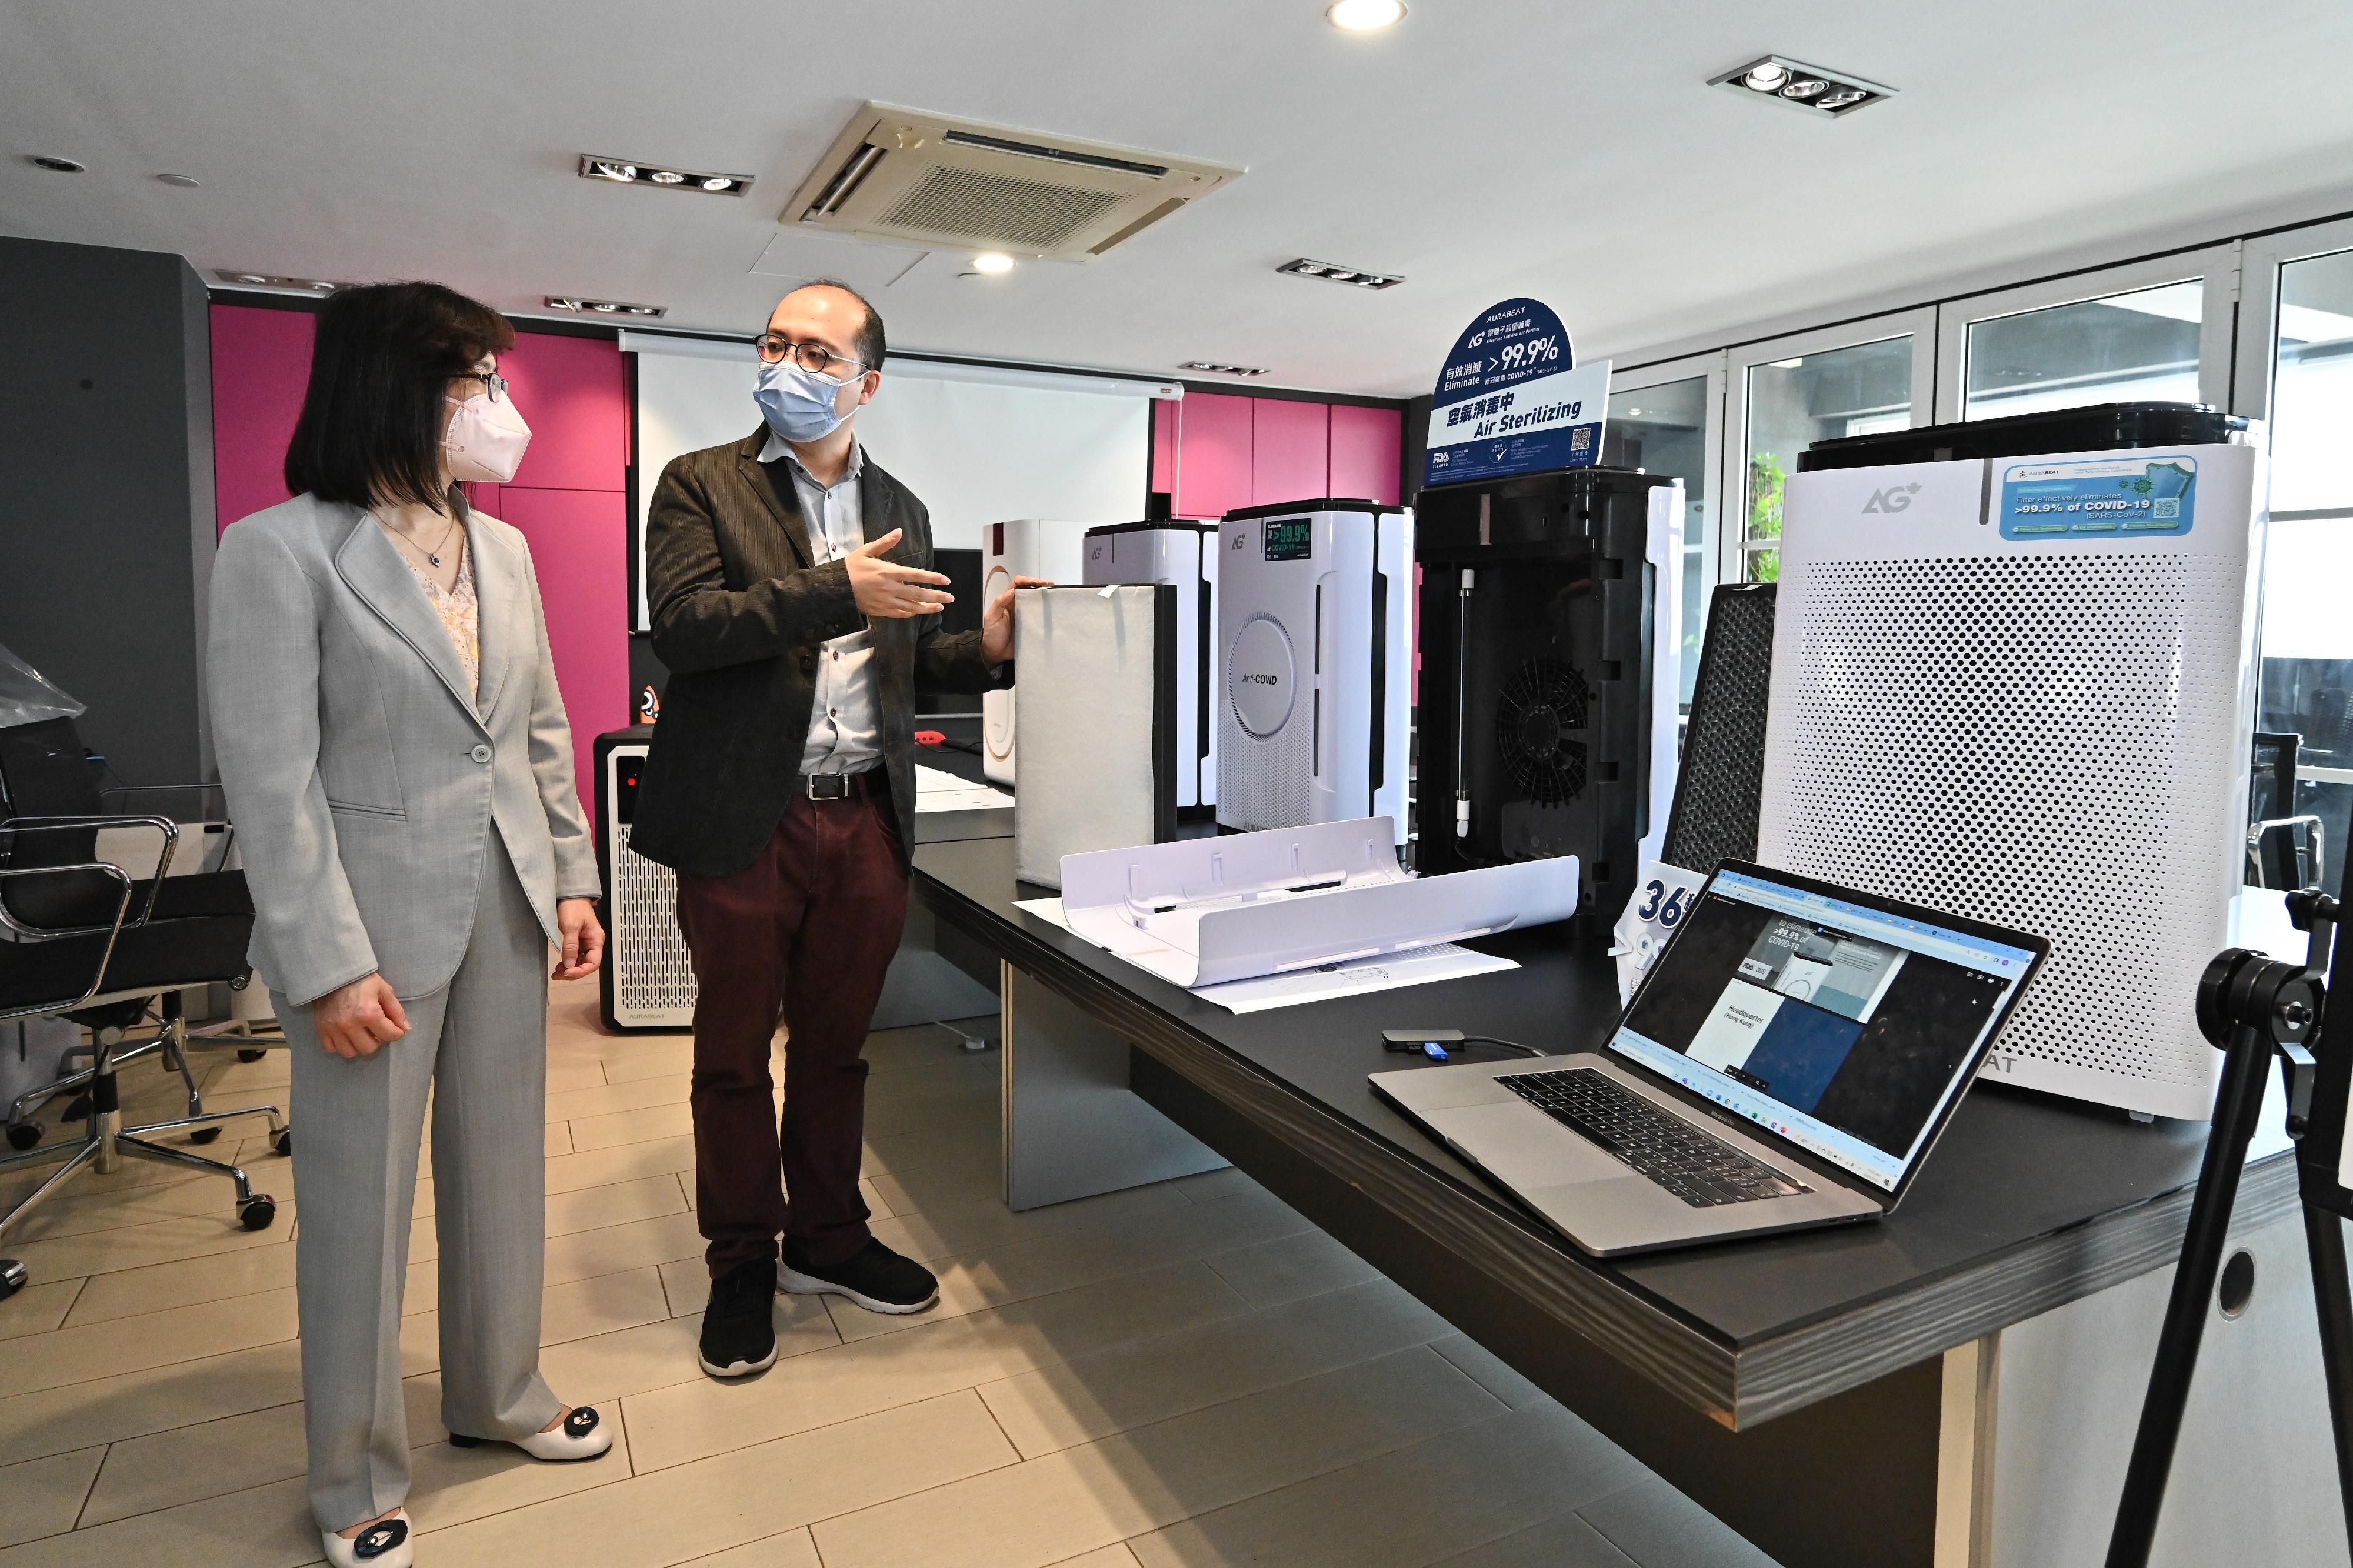 The Commissioner for Innovation and Technology, Ms Rebecca Pun (left), visits Aurabeat Technology Limited on April 29 to understand the research and development process in developing an air purification device with a variety of high-end disinfection technologies.